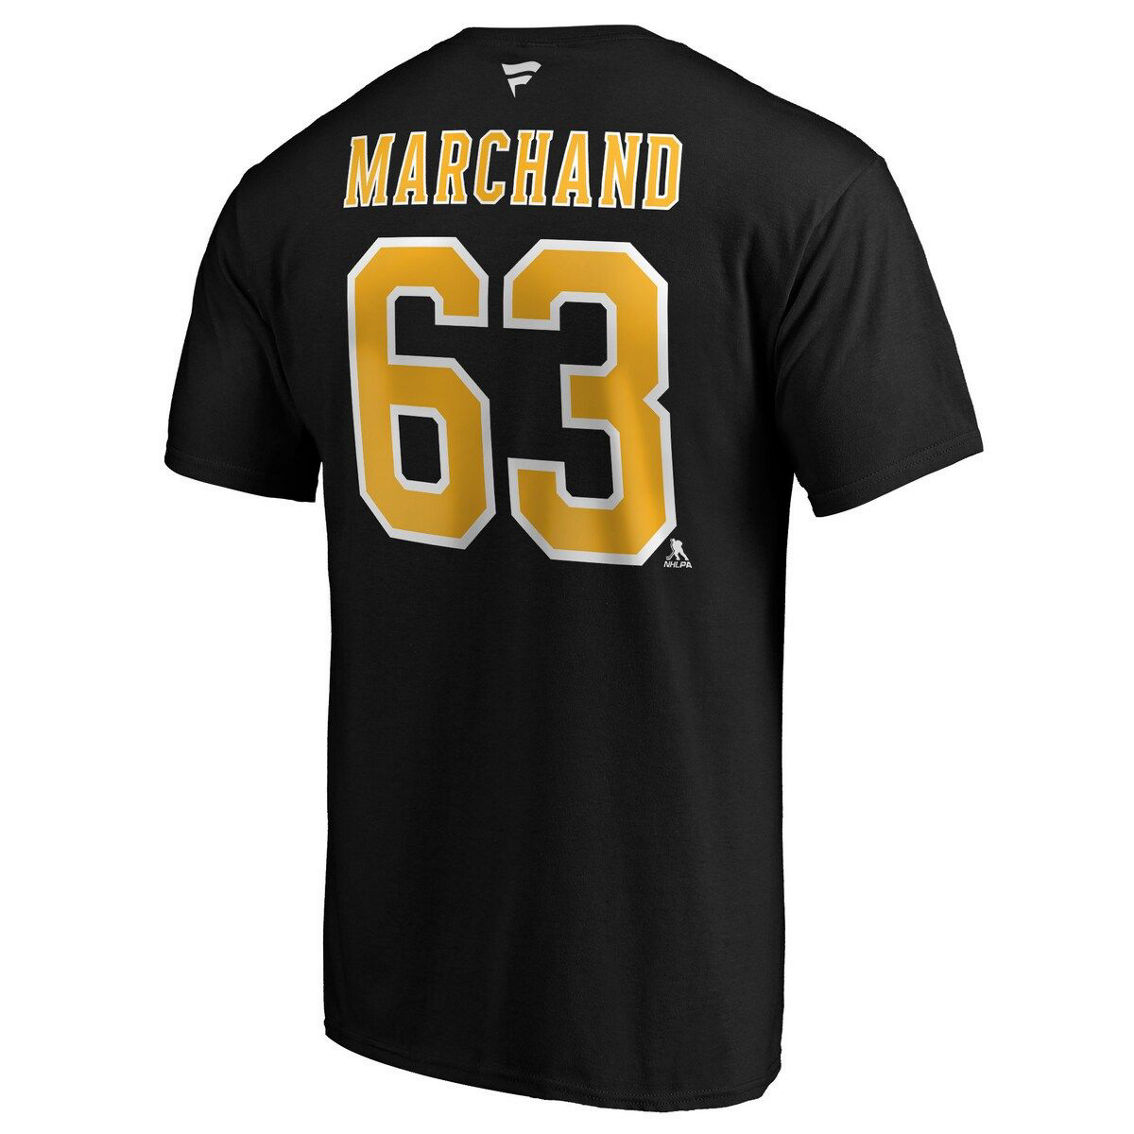 Fanatics Branded Men's Brad Marchand Black Boston Bruins Team Authentic Stack Name & Number T-Shirt - Image 4 of 4